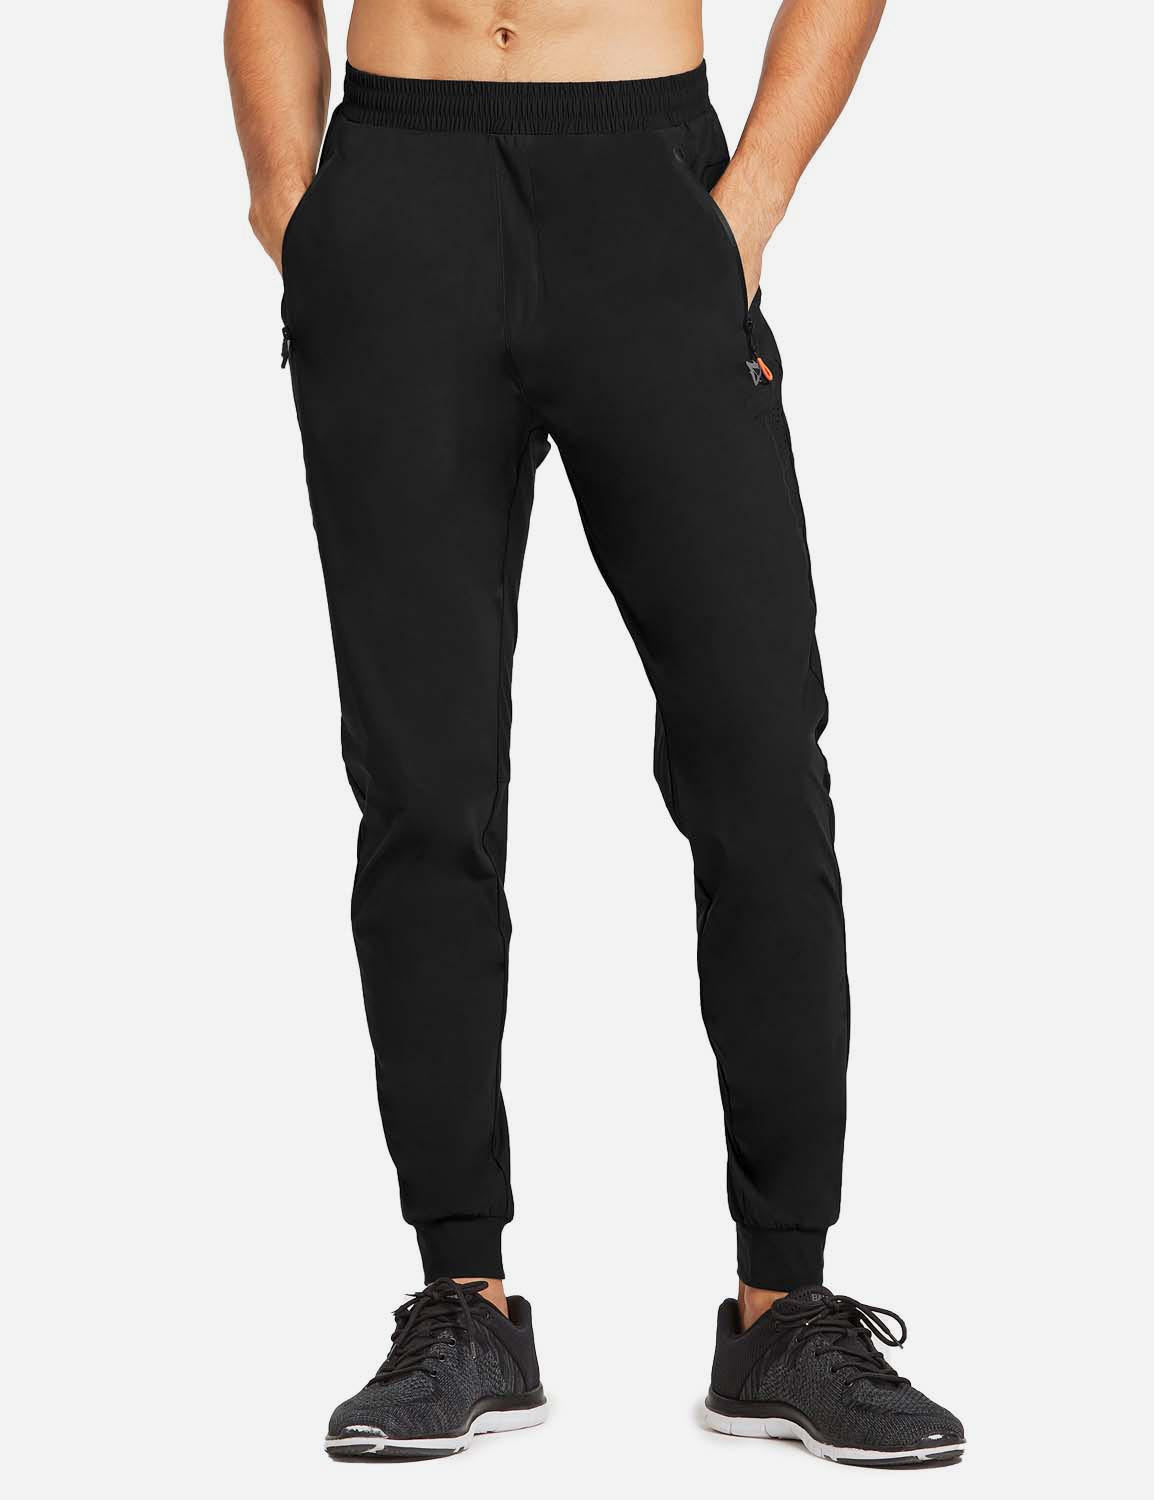 Baleaf Men's Mid Rise Seamless Quick Dry Tapered Joggers